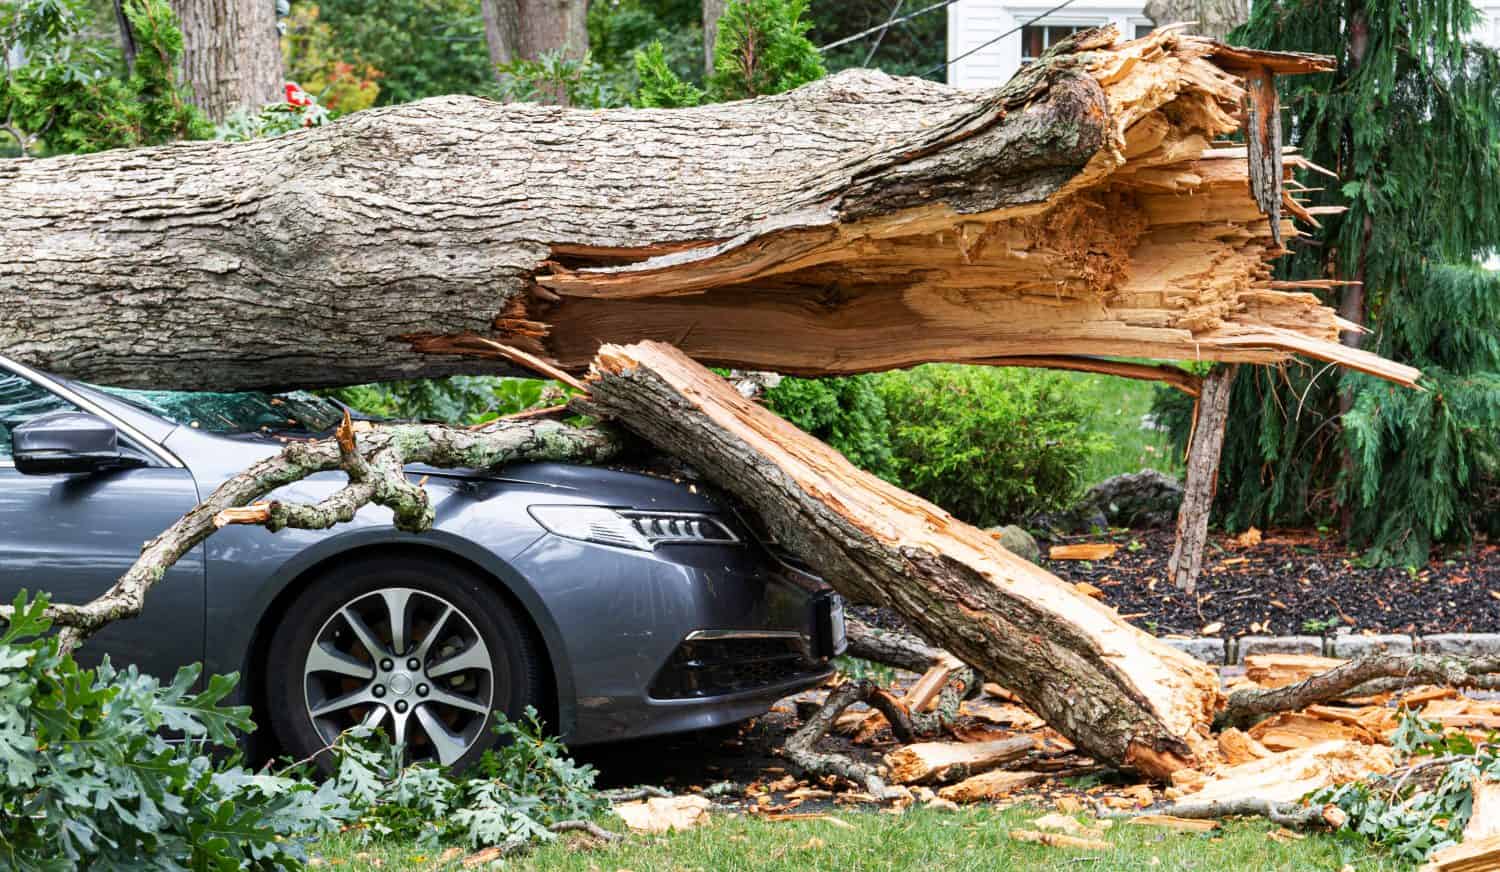 A car crushed with a tree on top of it after the tree split and fell during a wind storm on Long Island New York.